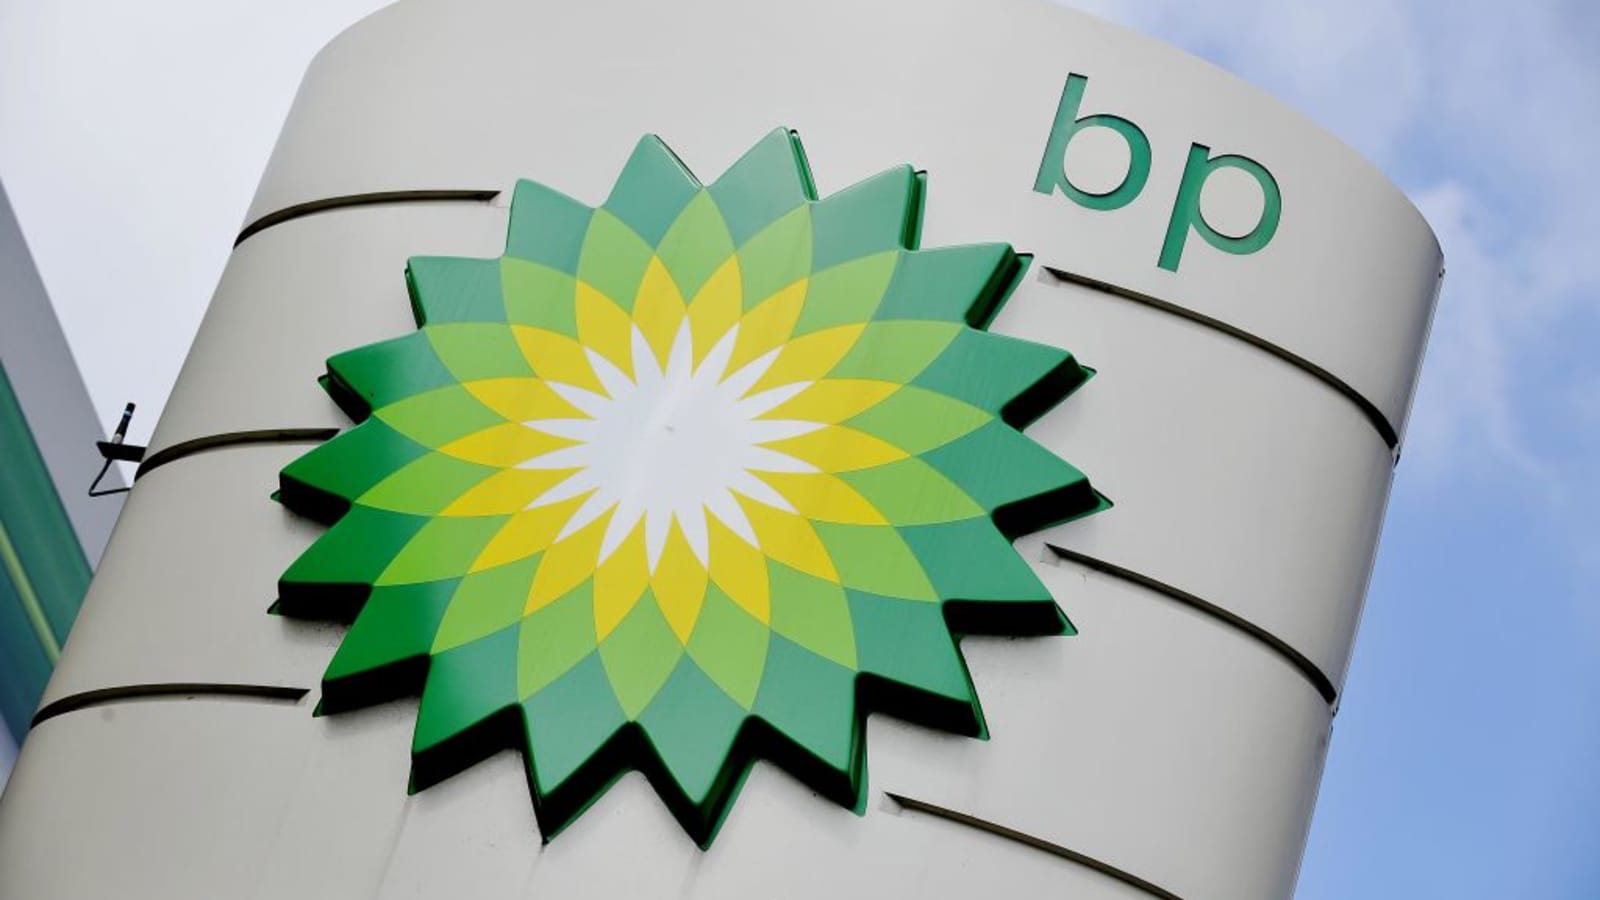 19-facts-about-bp